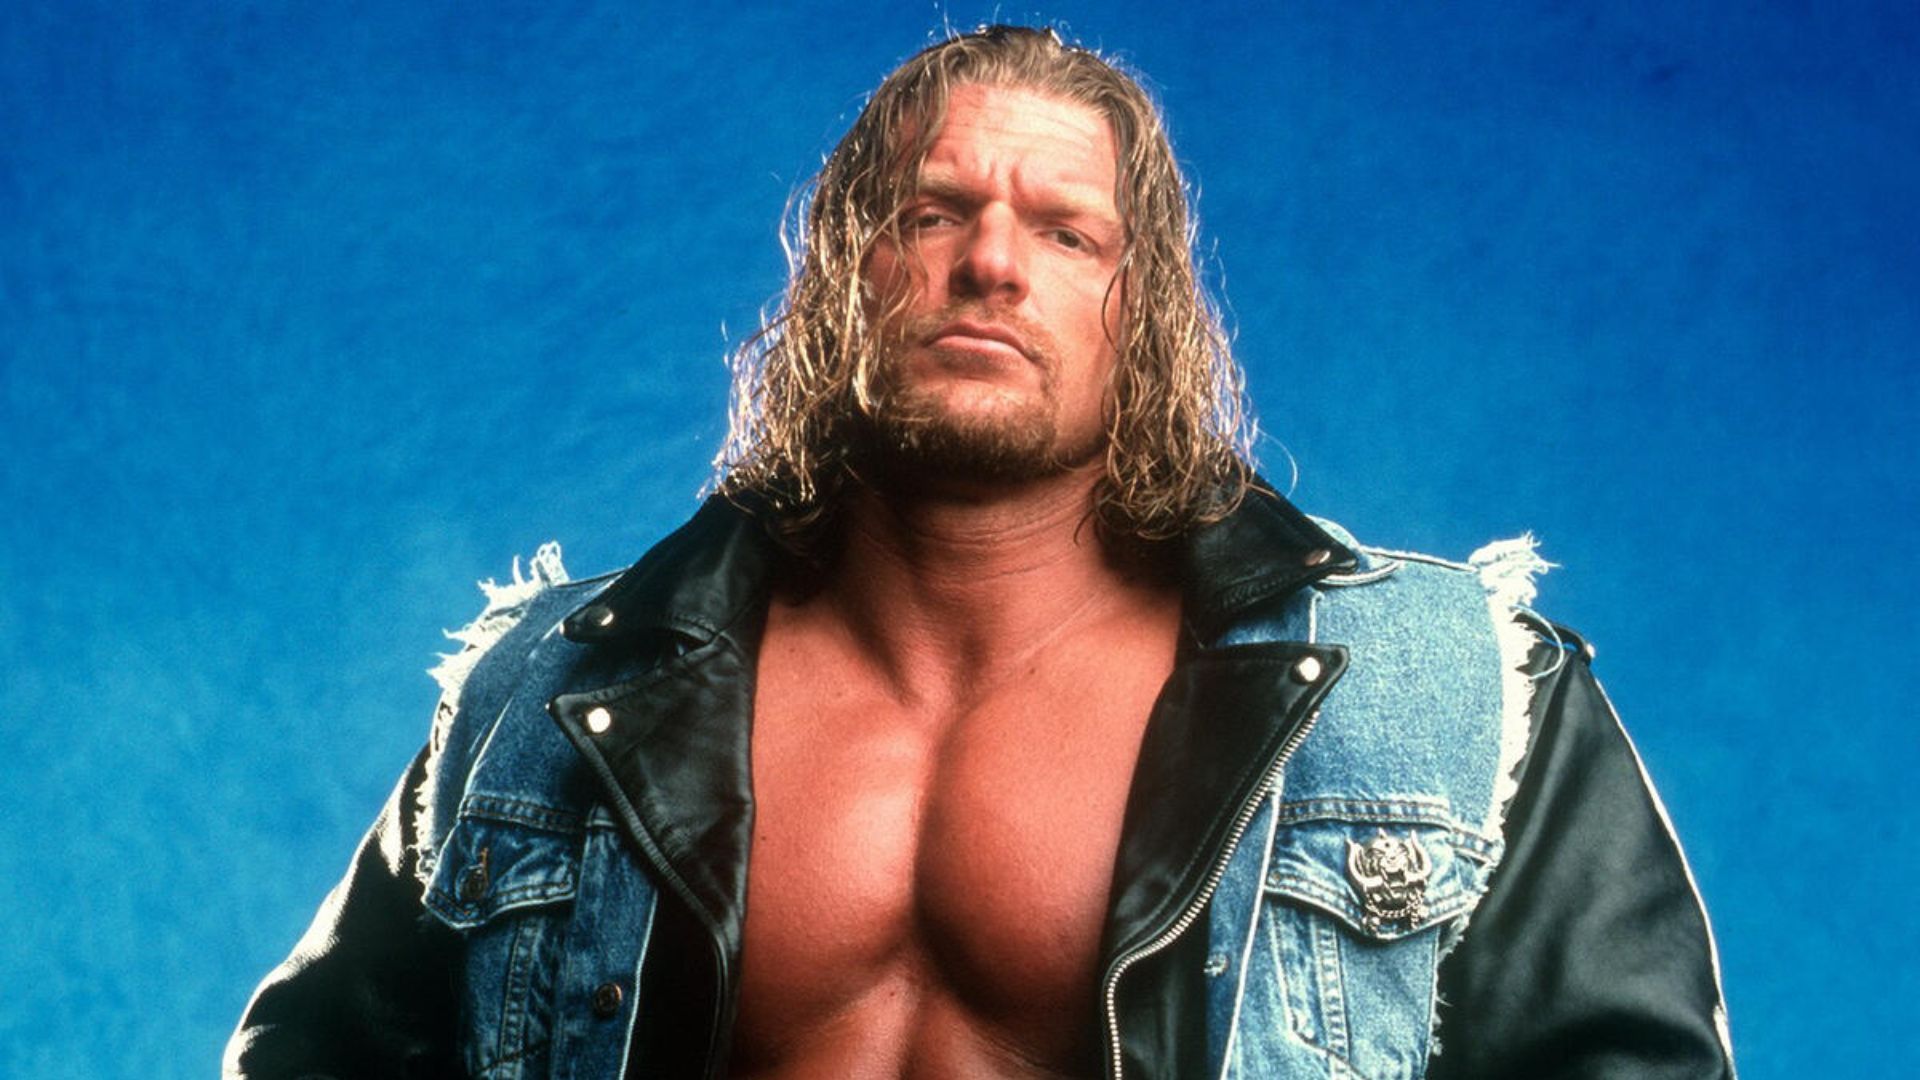 Triple H, real name Paul Levesque, joined WWE in 1995